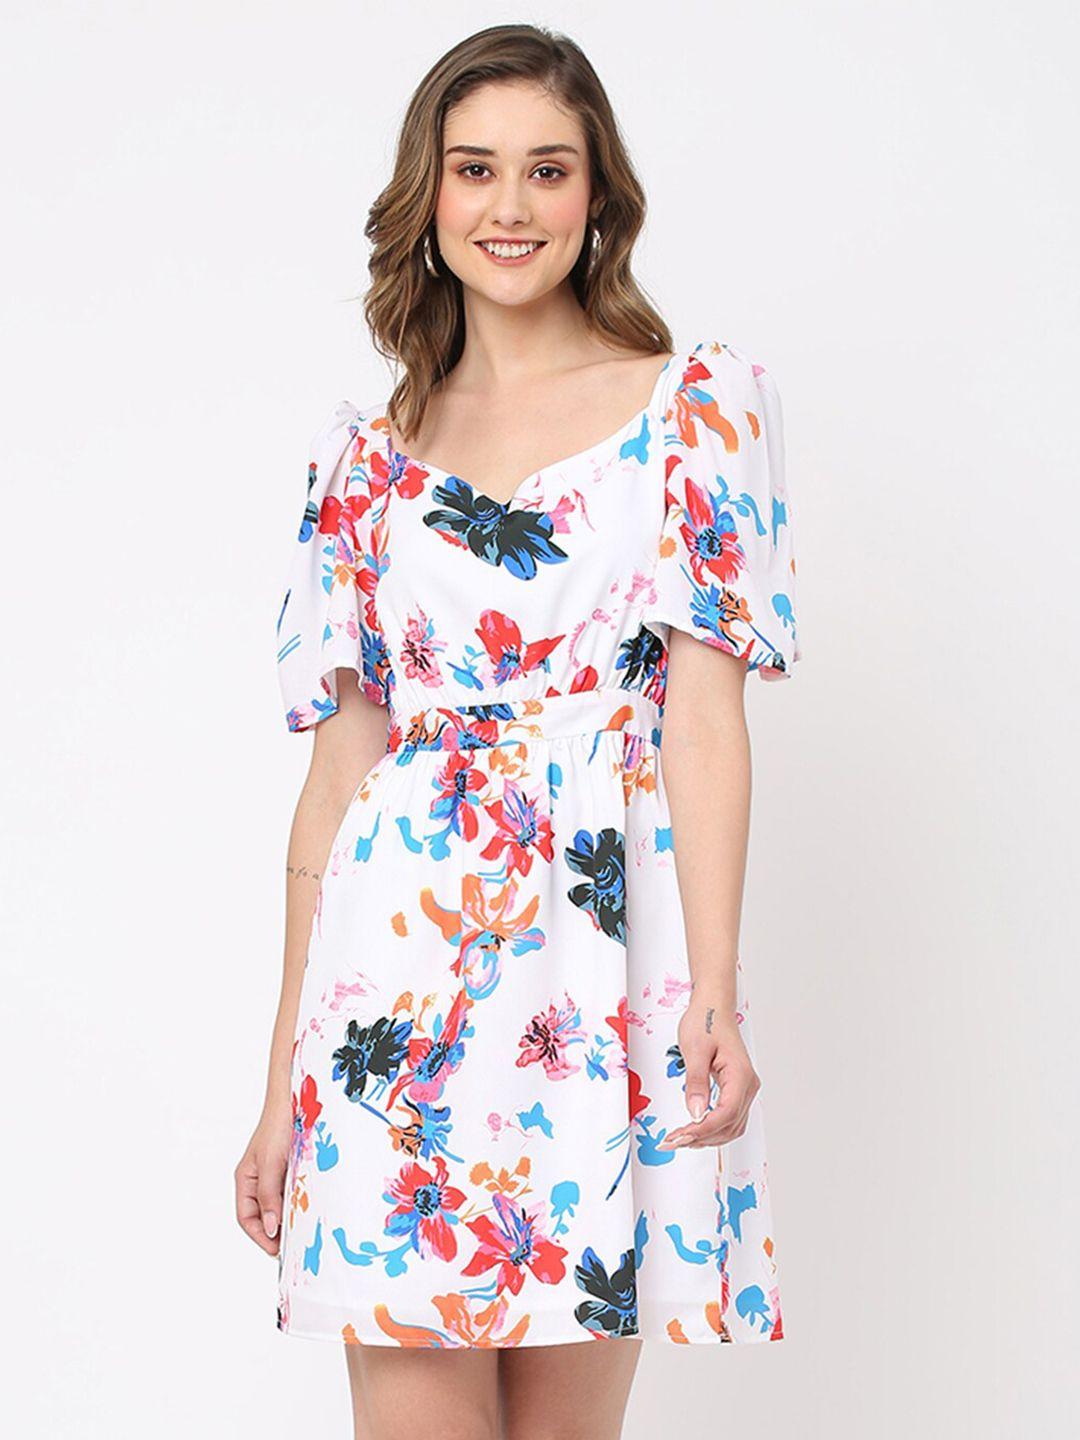 mish-white-and-blue-floral-printed-sweetheart-neck-fit-&-flare-dress